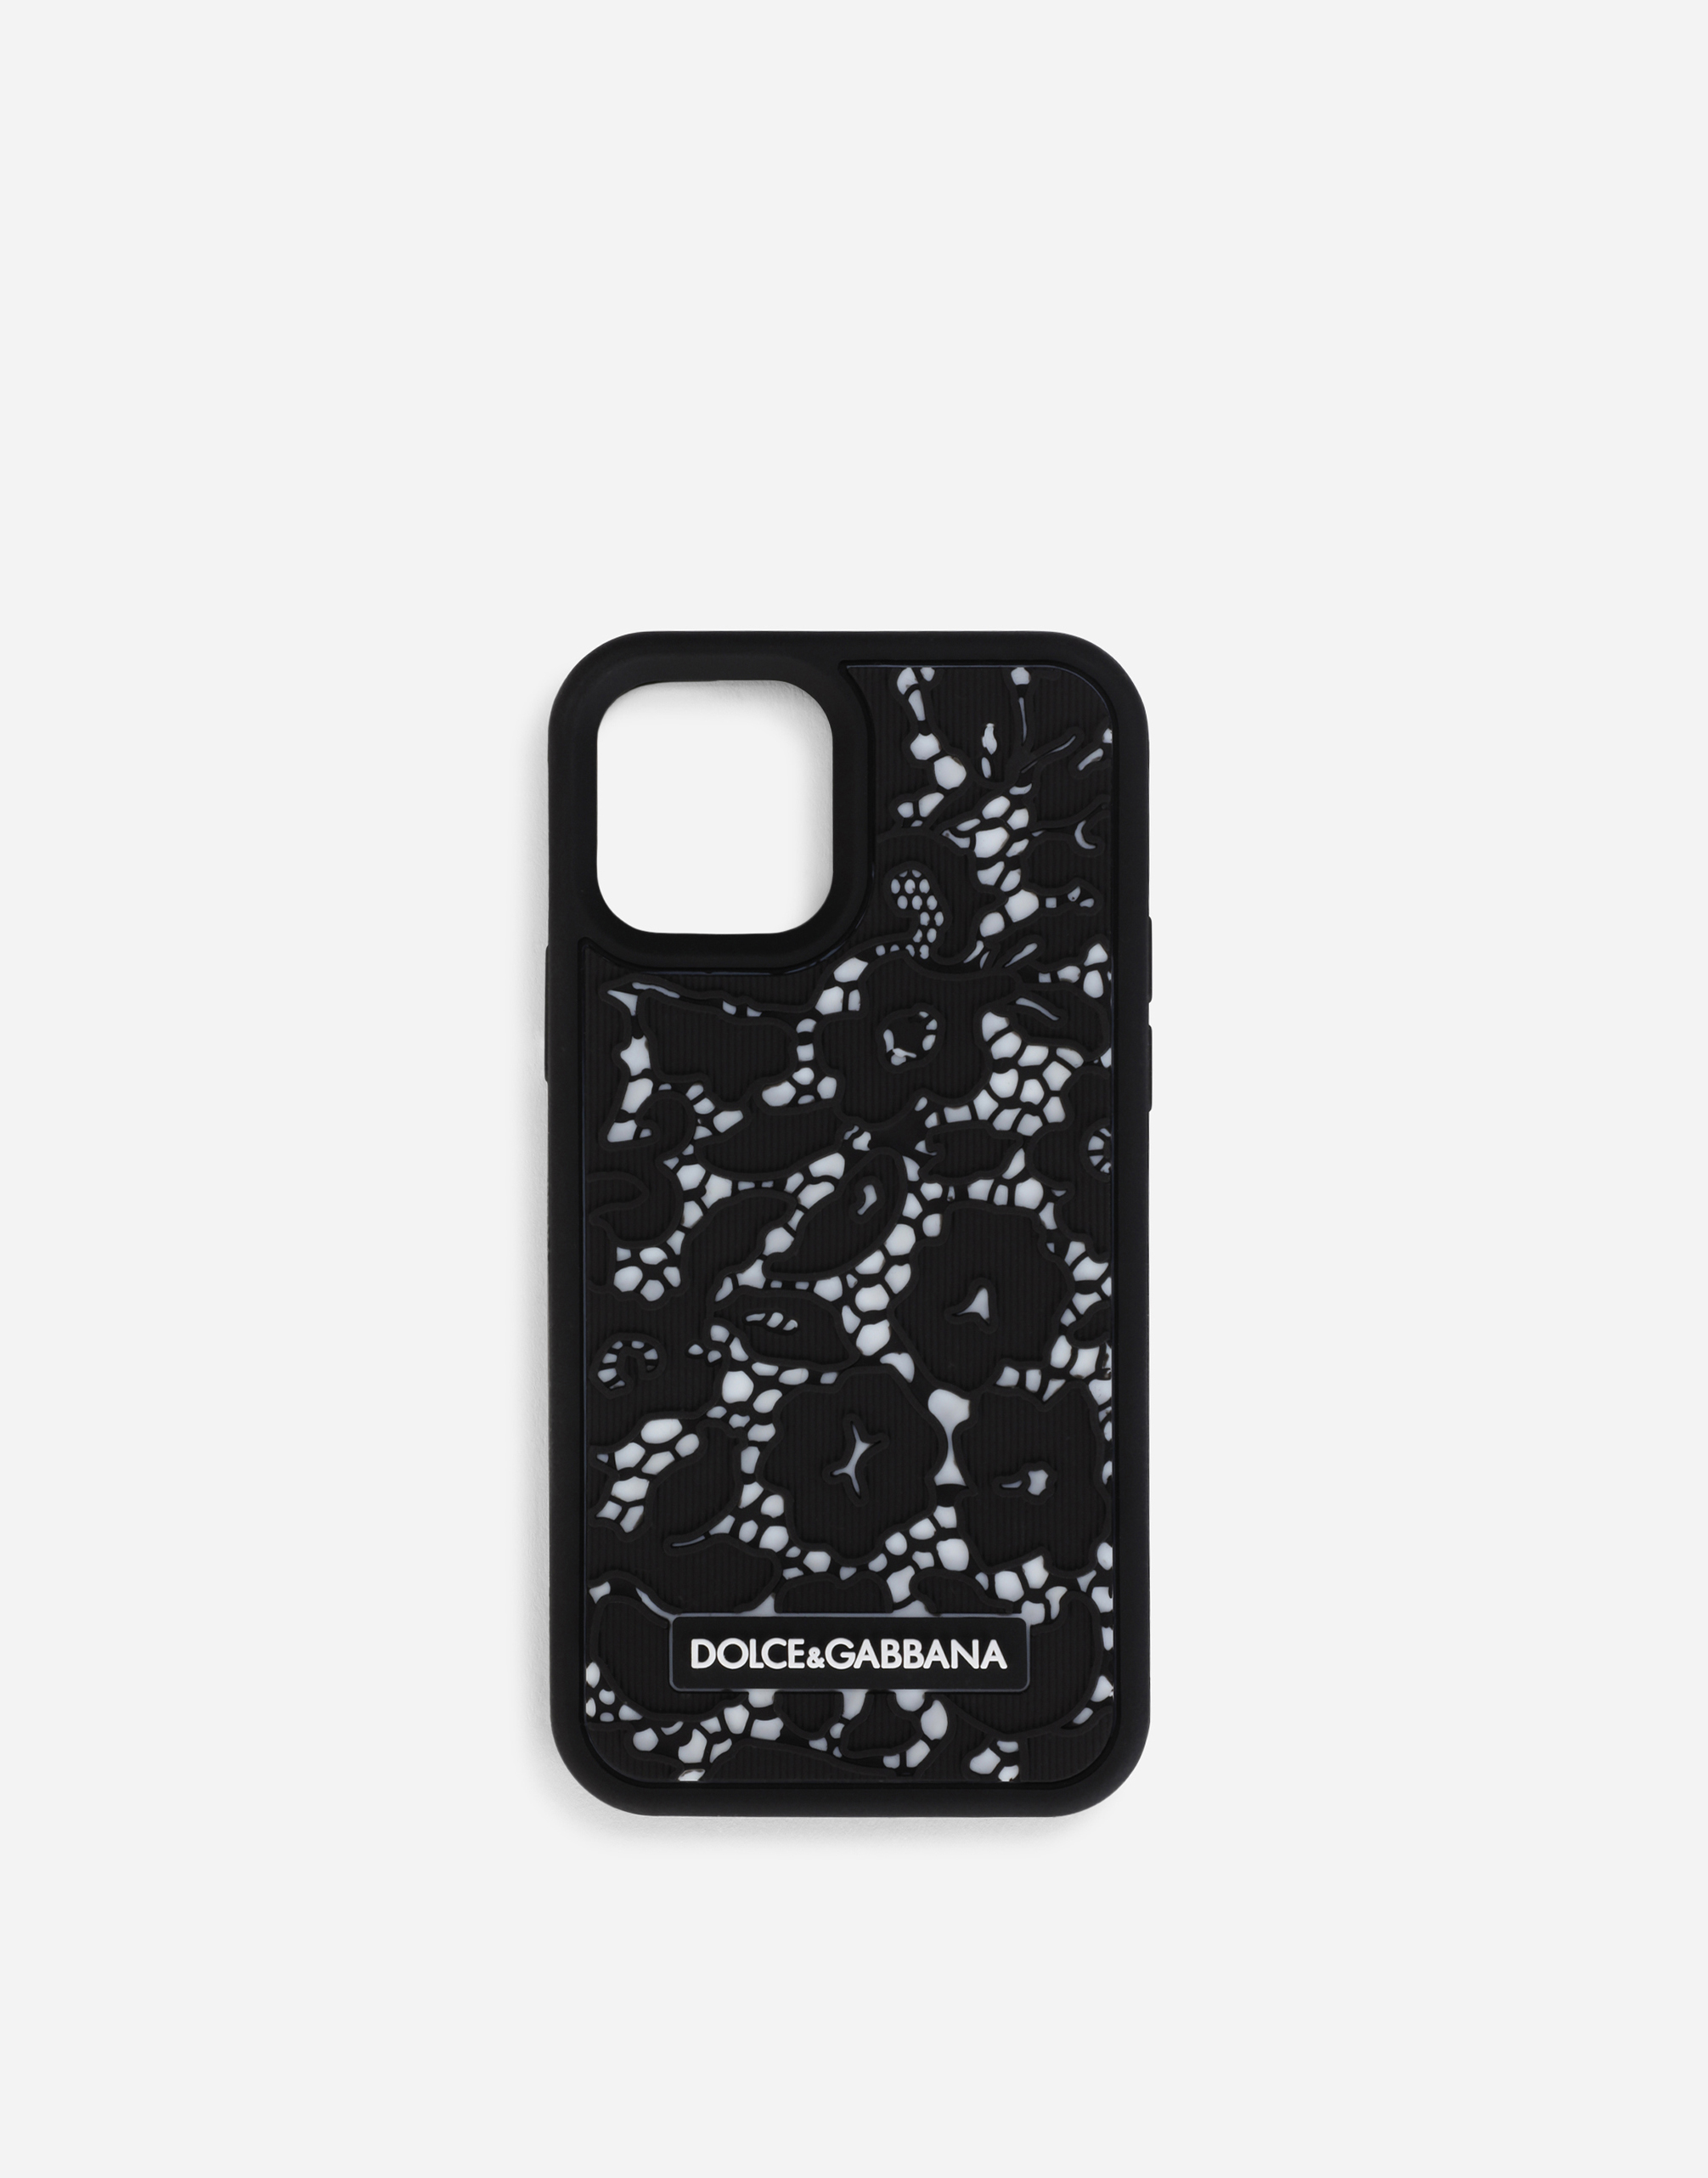 Lace rubber iPhone 12/12 Pro cover in Black/White